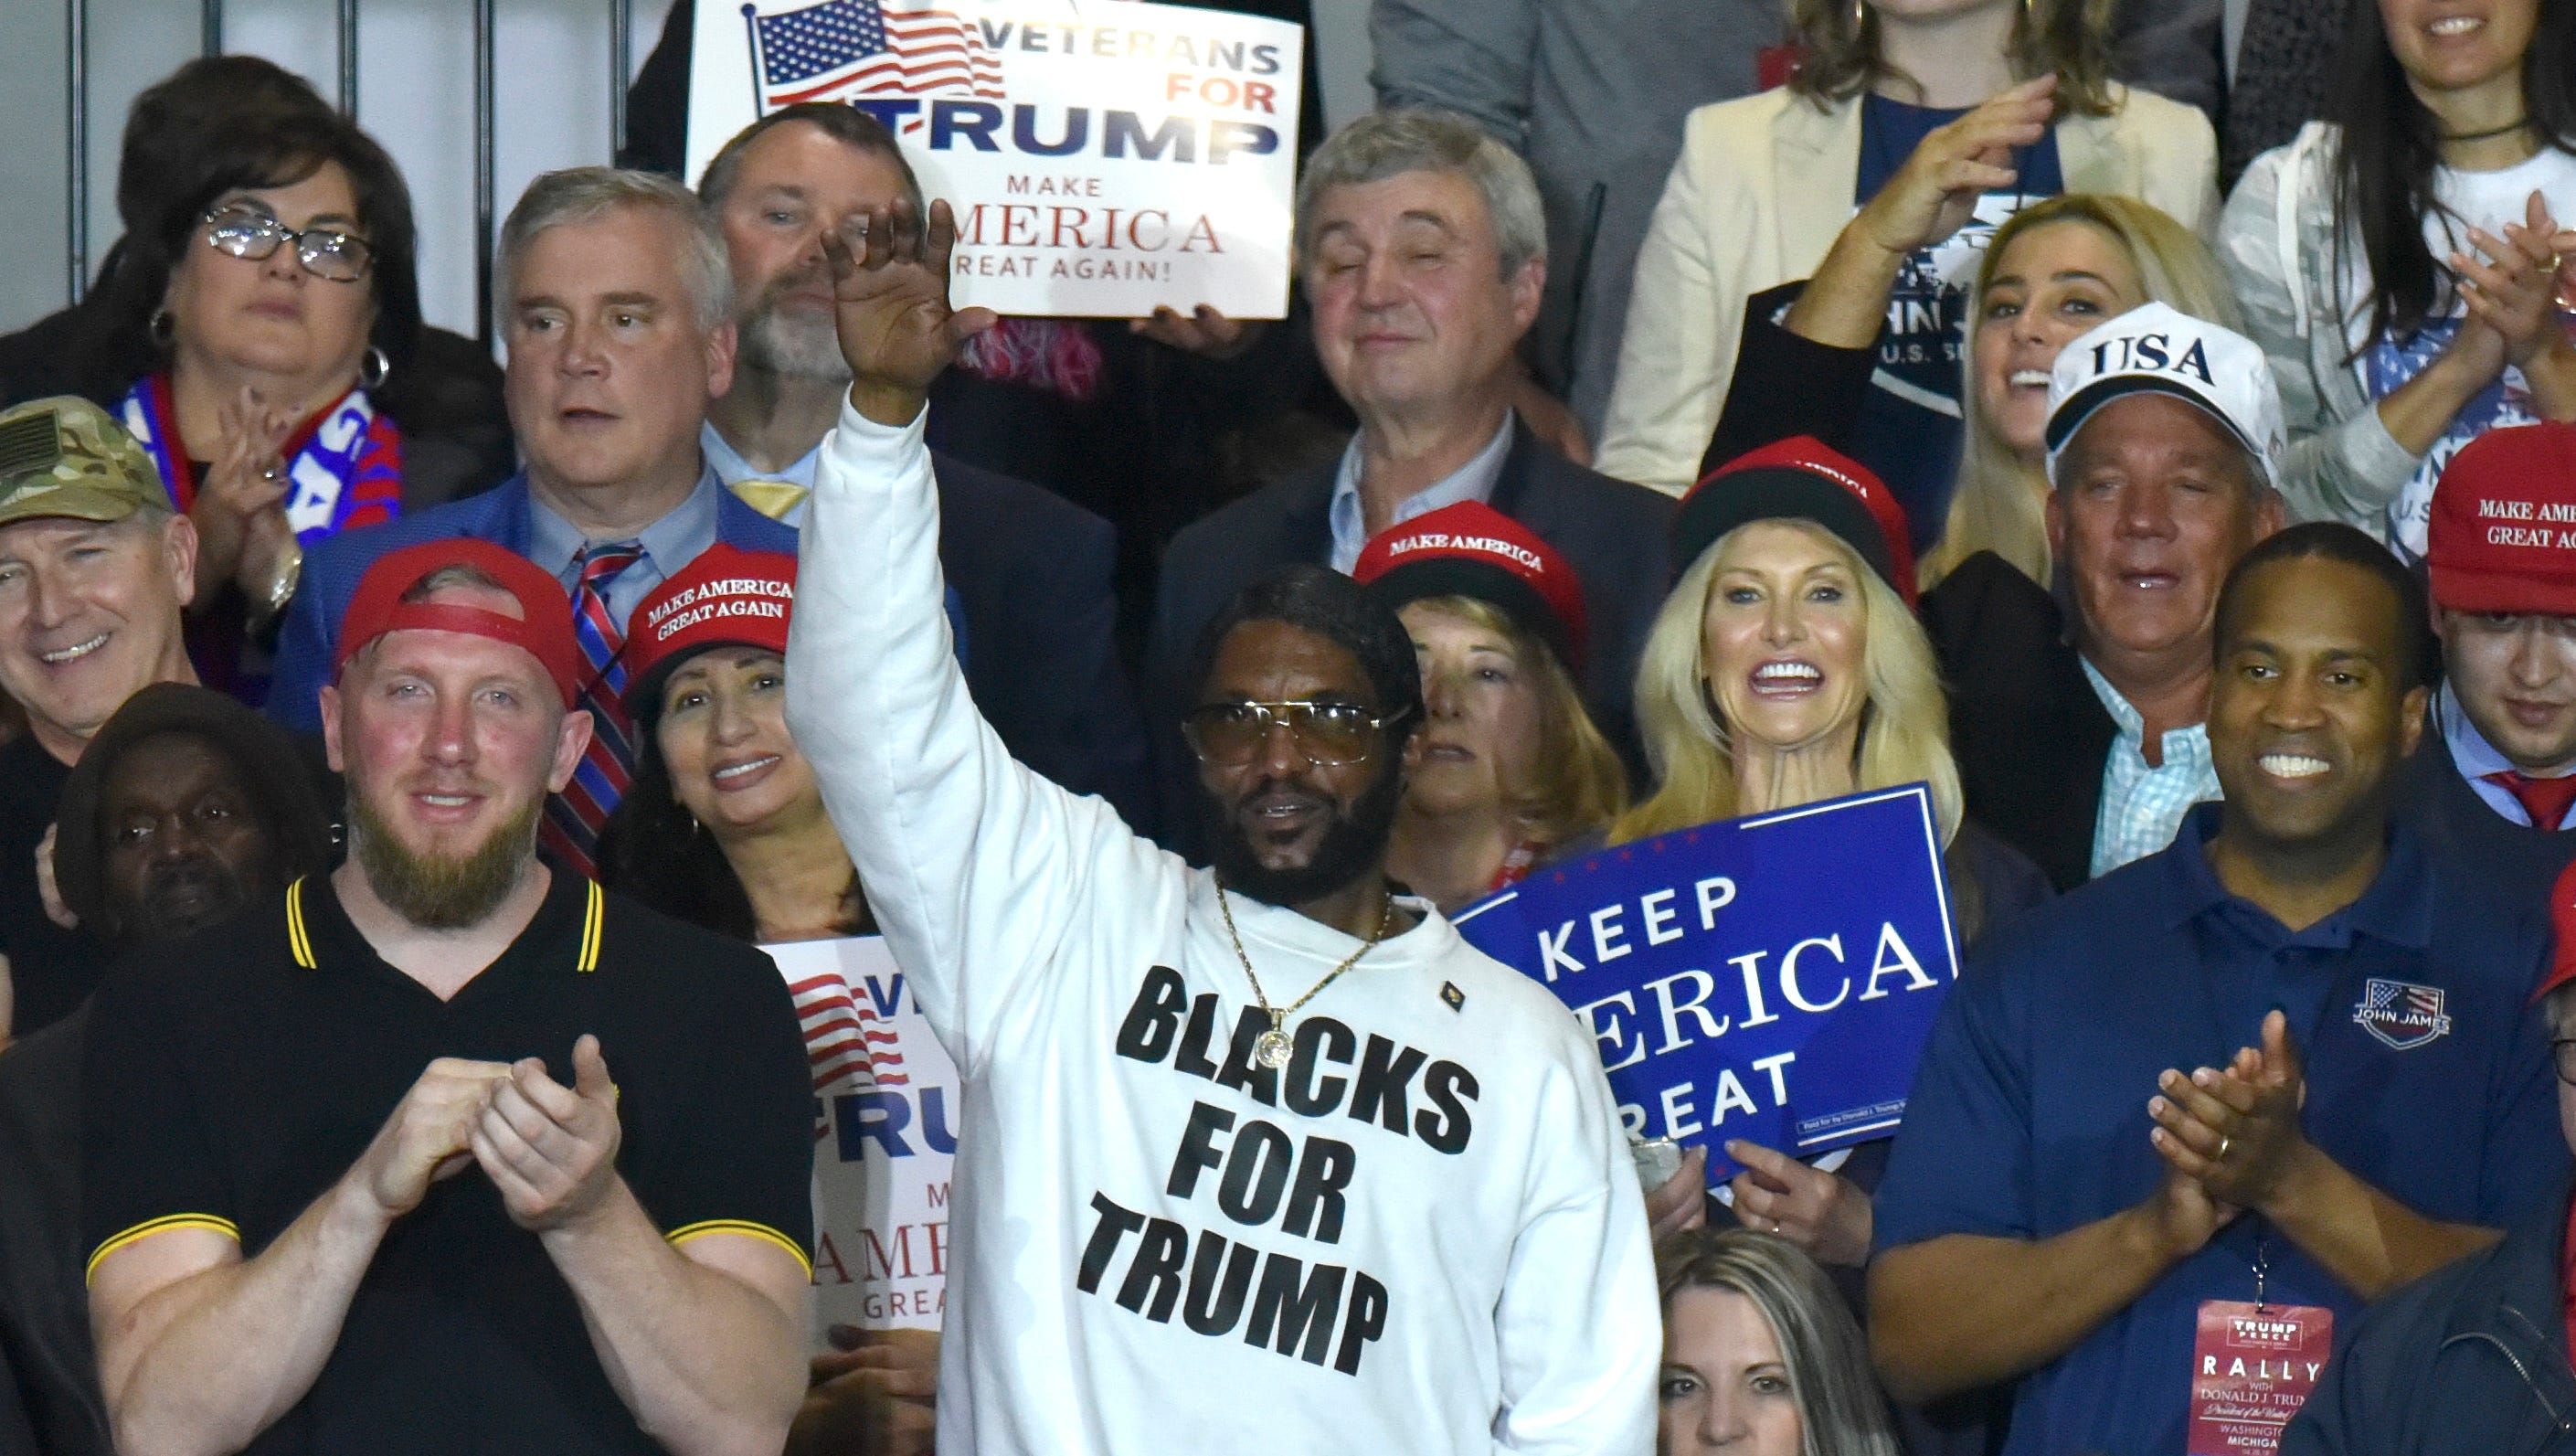 Maurice Symonette, of Miami, Florida, wears a Blacks For Trump shirt. He was proud to say he flew in from Miami for this event.